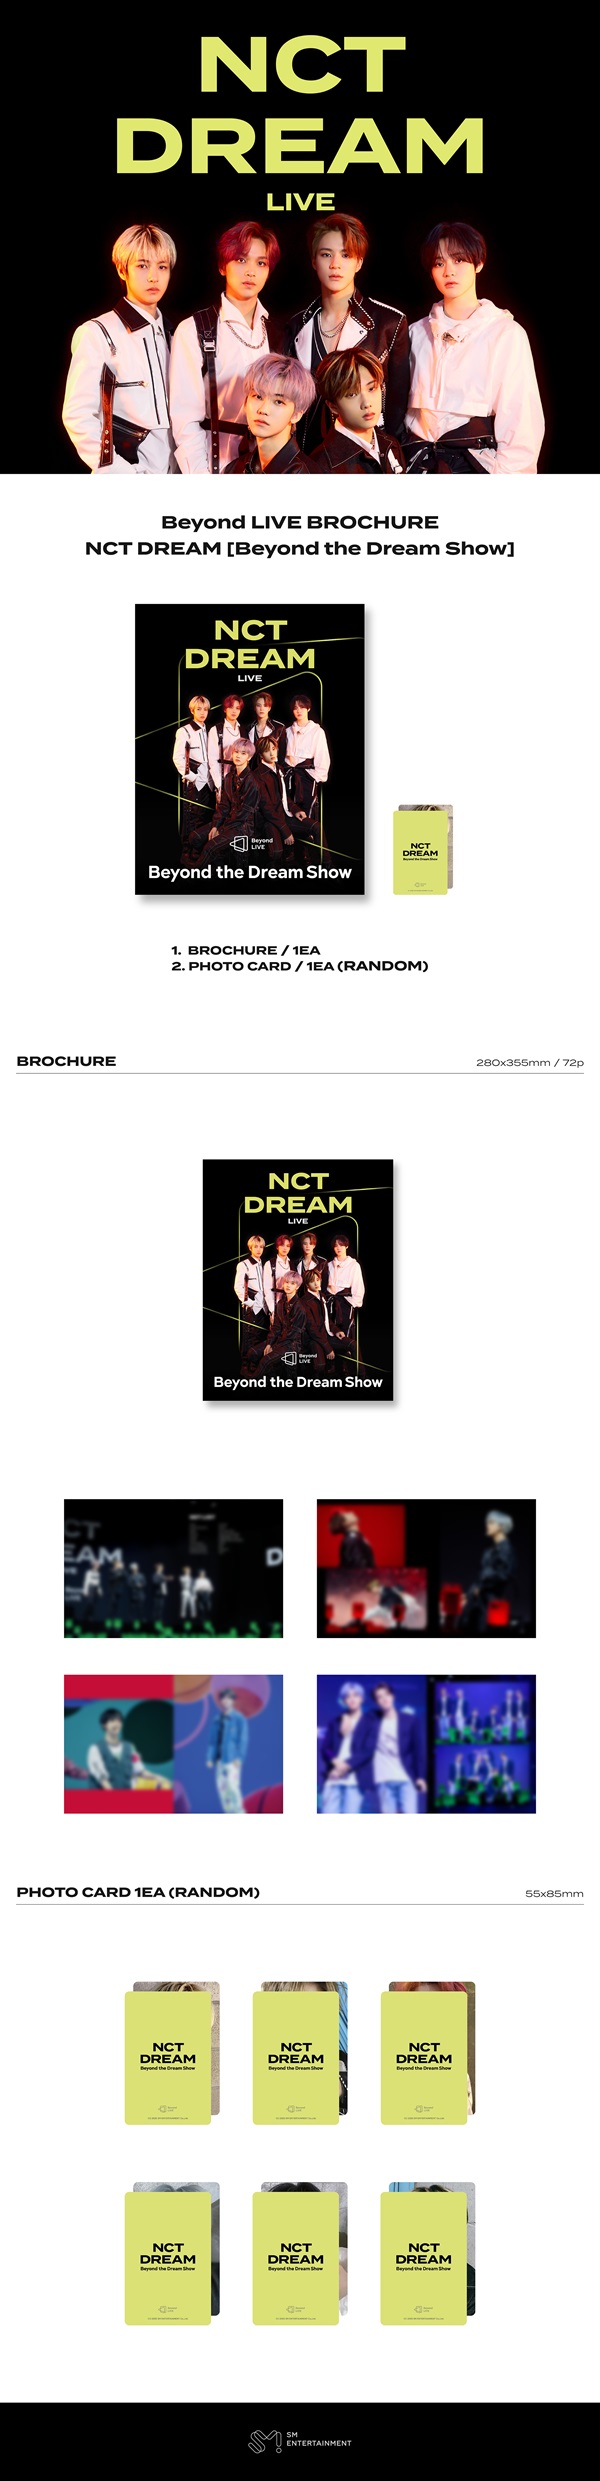 NCT_3